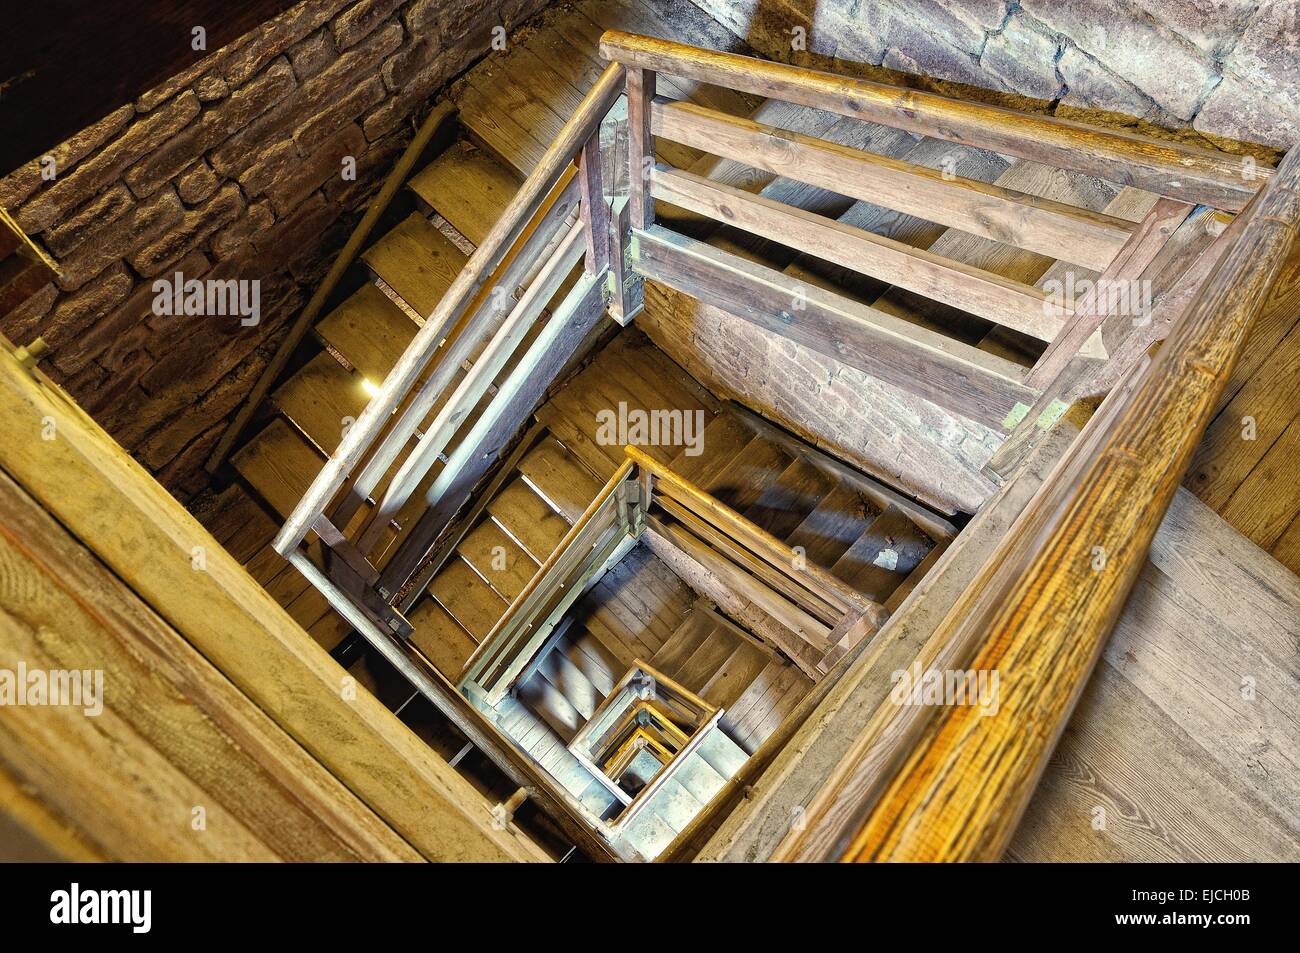 Wooden staircase Stock Photo